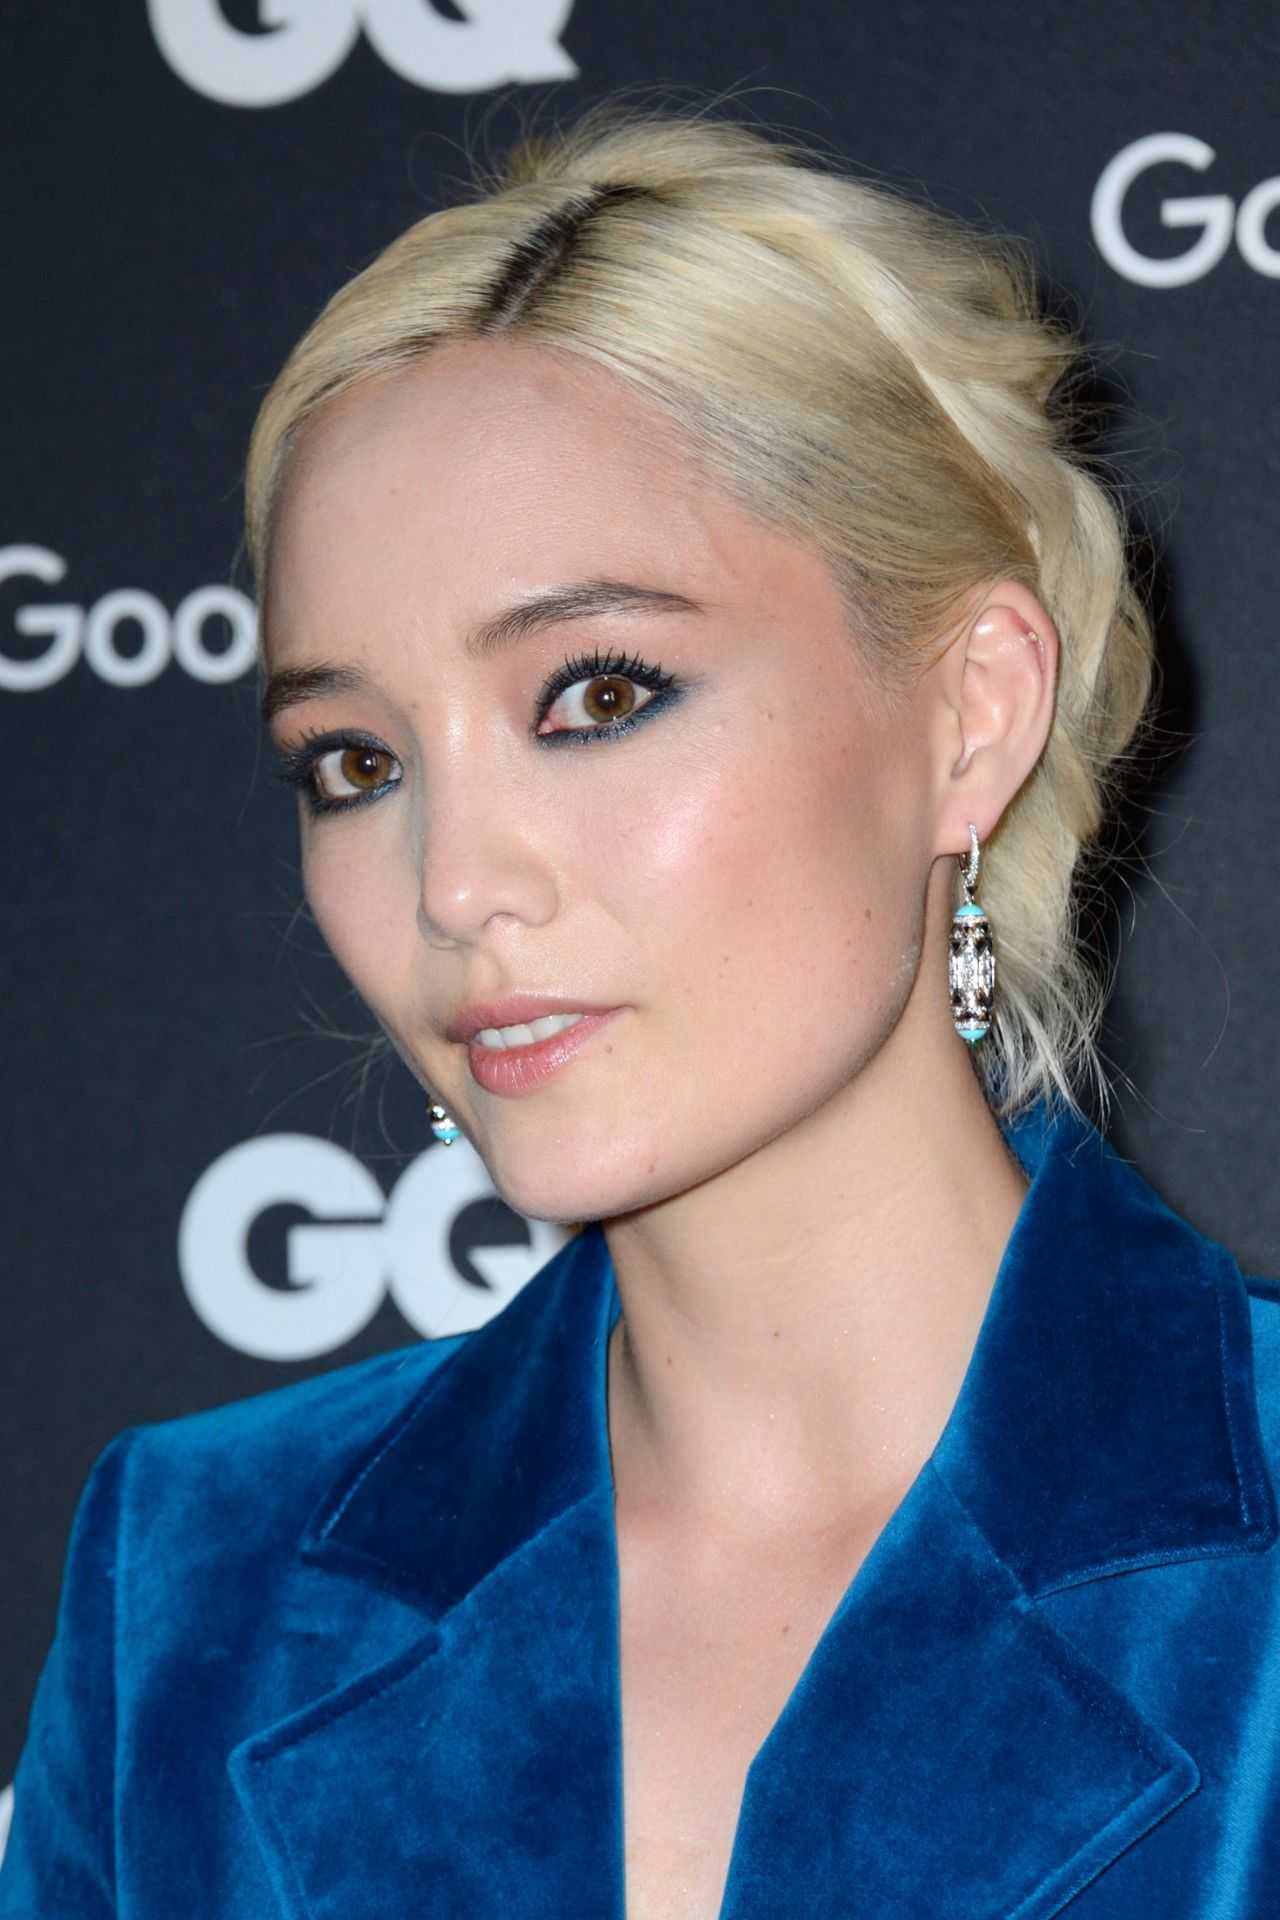 70+ Hot Pictures Of Pom Klementieff Who Plays Mantis In Marvel Cinematic Universe 242